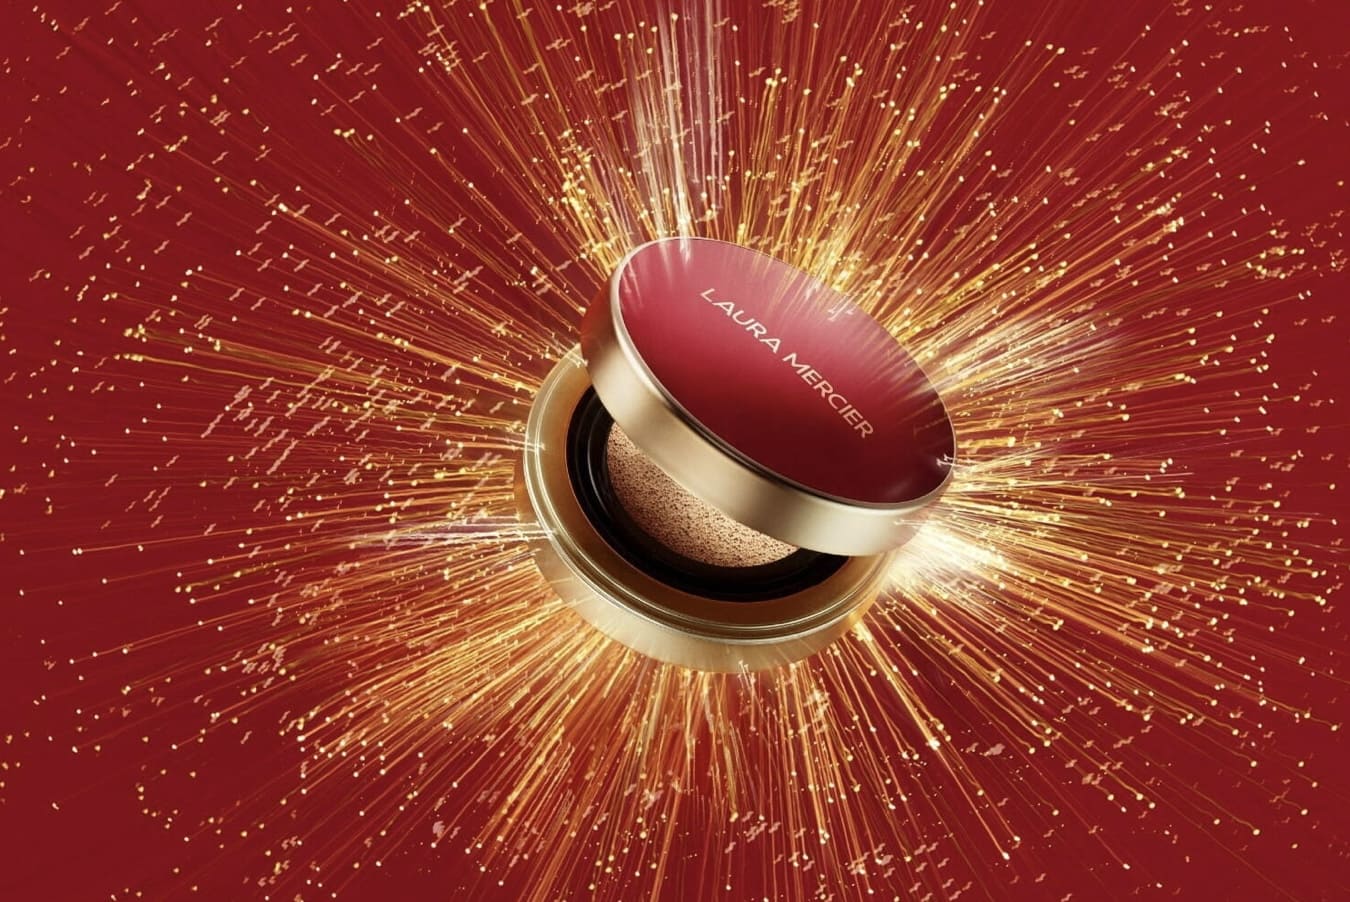 Laura Mercier collection nouvel an chinois 2022